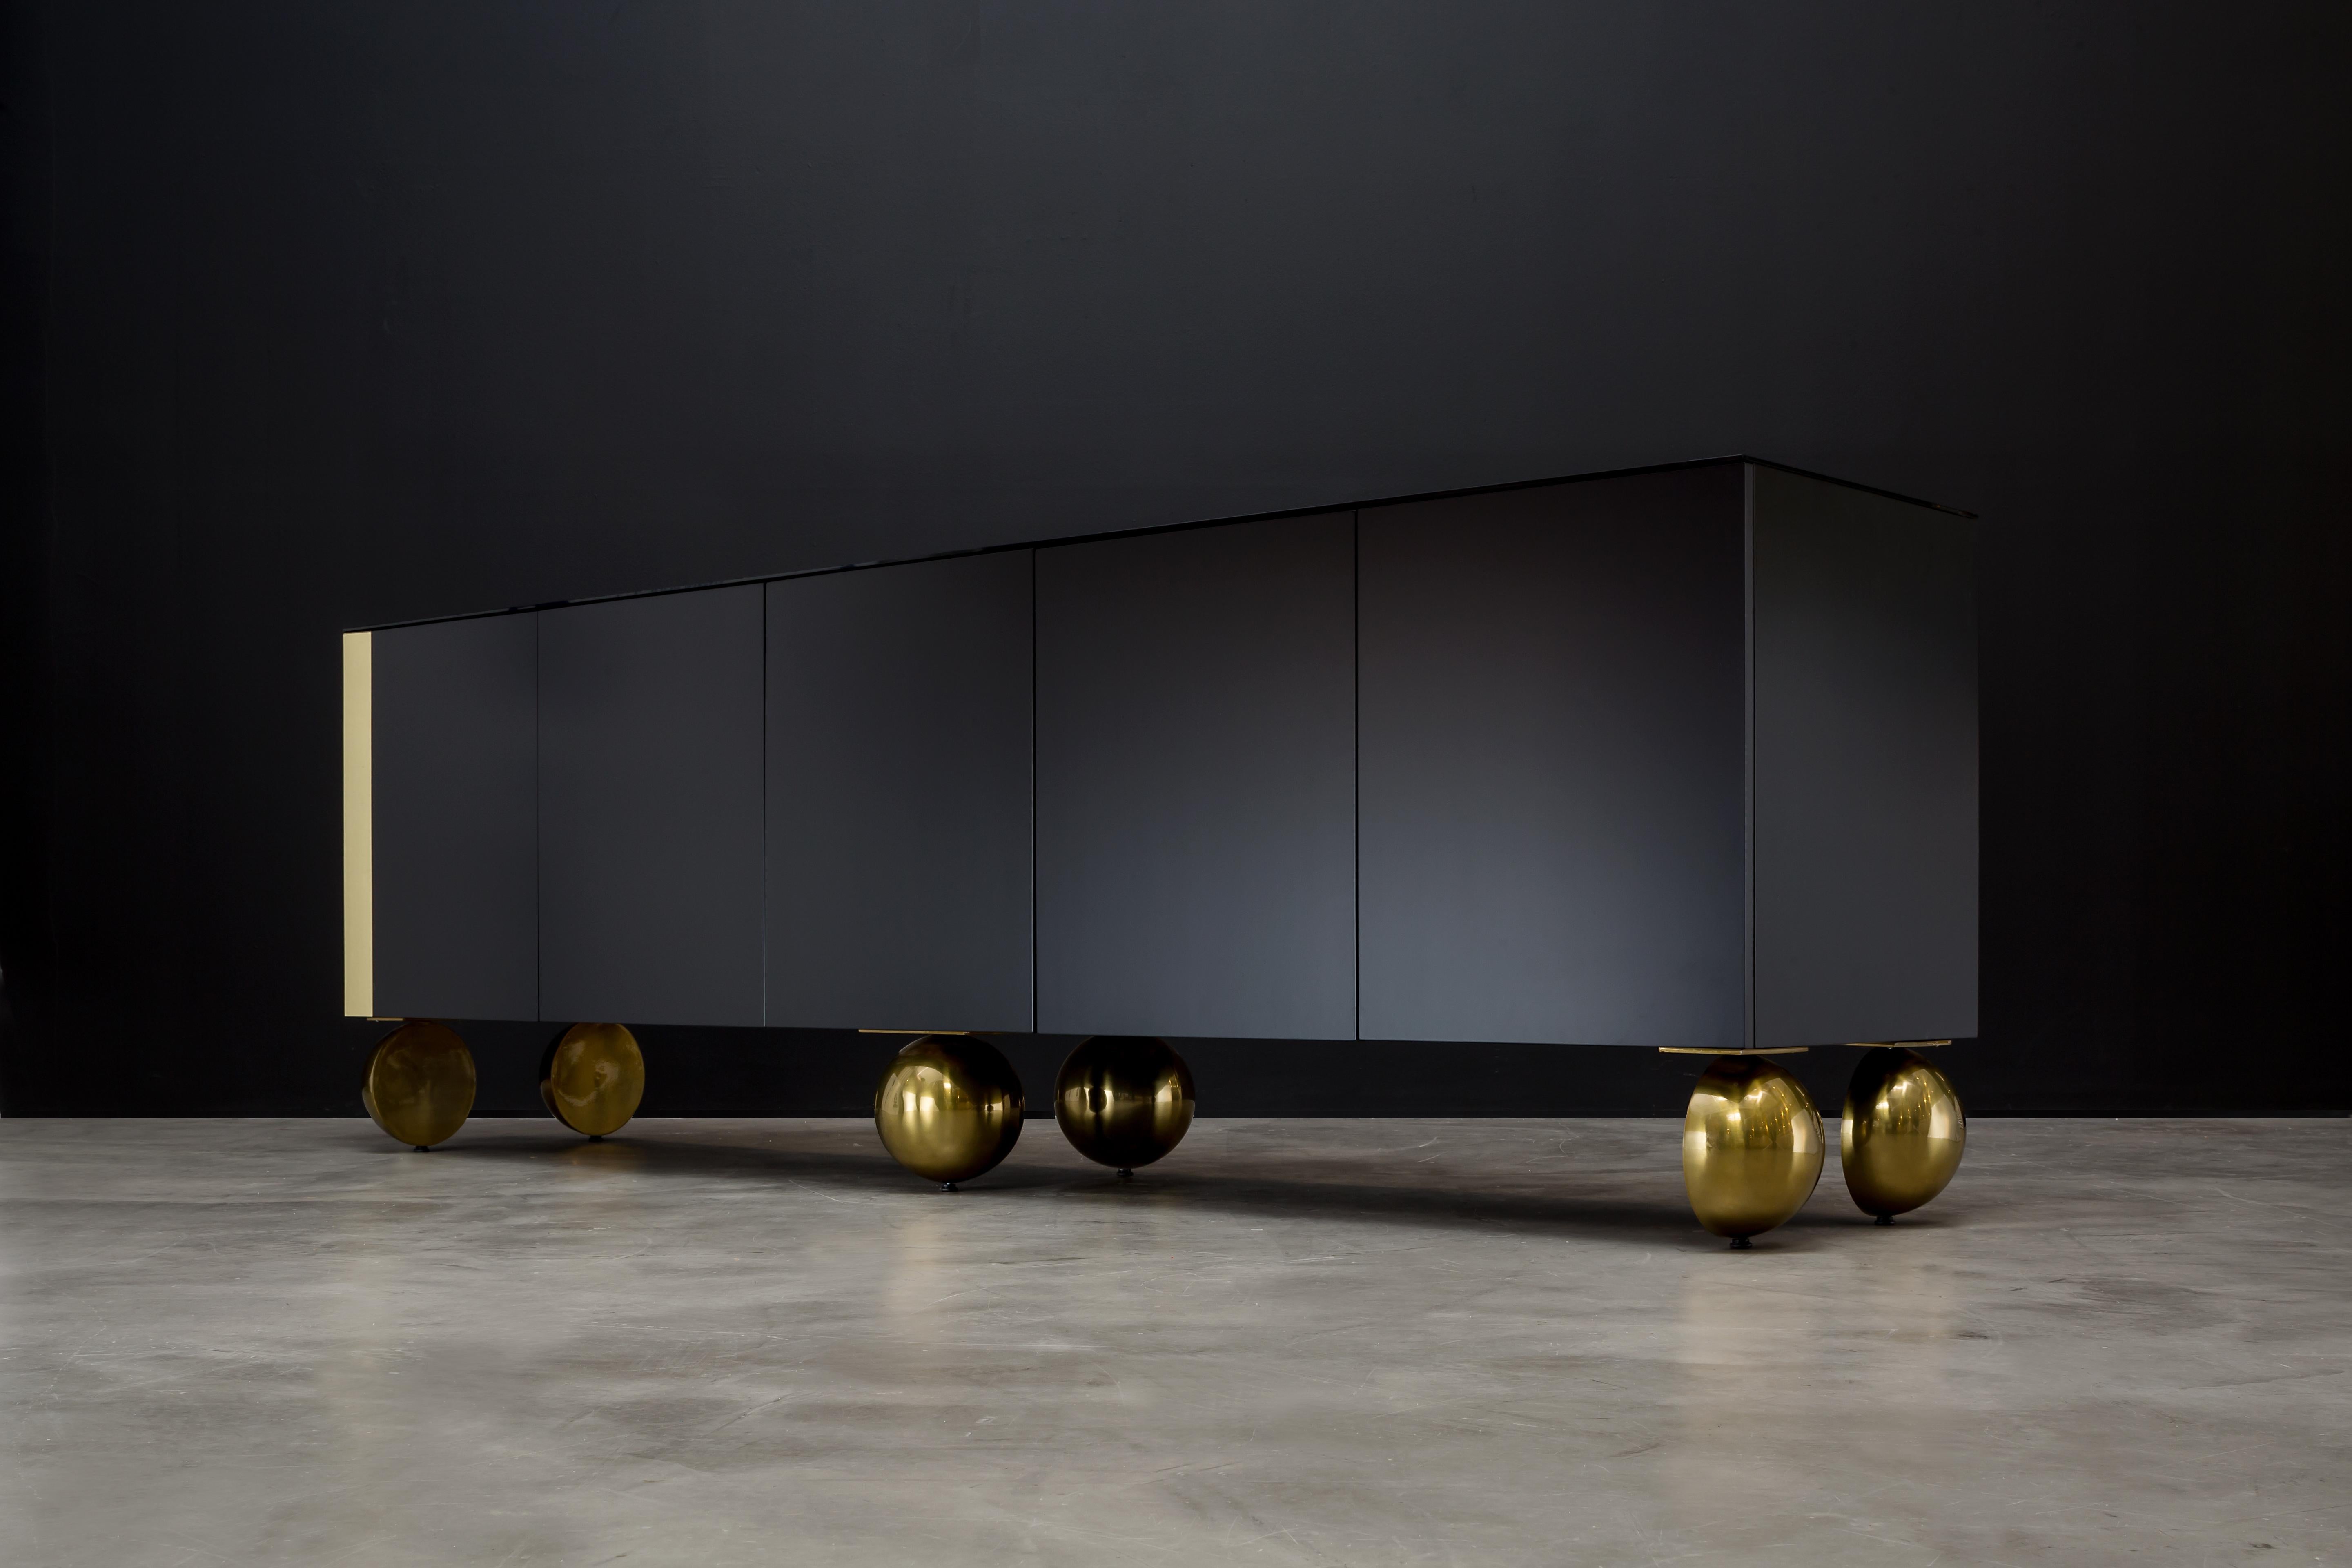 BALL CREDENZA XTRA - Modern Black Lacquer with Metal Inlay and Metallic Legs

Introducing the Ball Credenza Xtra, a stunning piece of modern furniture designed to elevate your living space. Handcrafted in California, this credenza boasts sleek lines